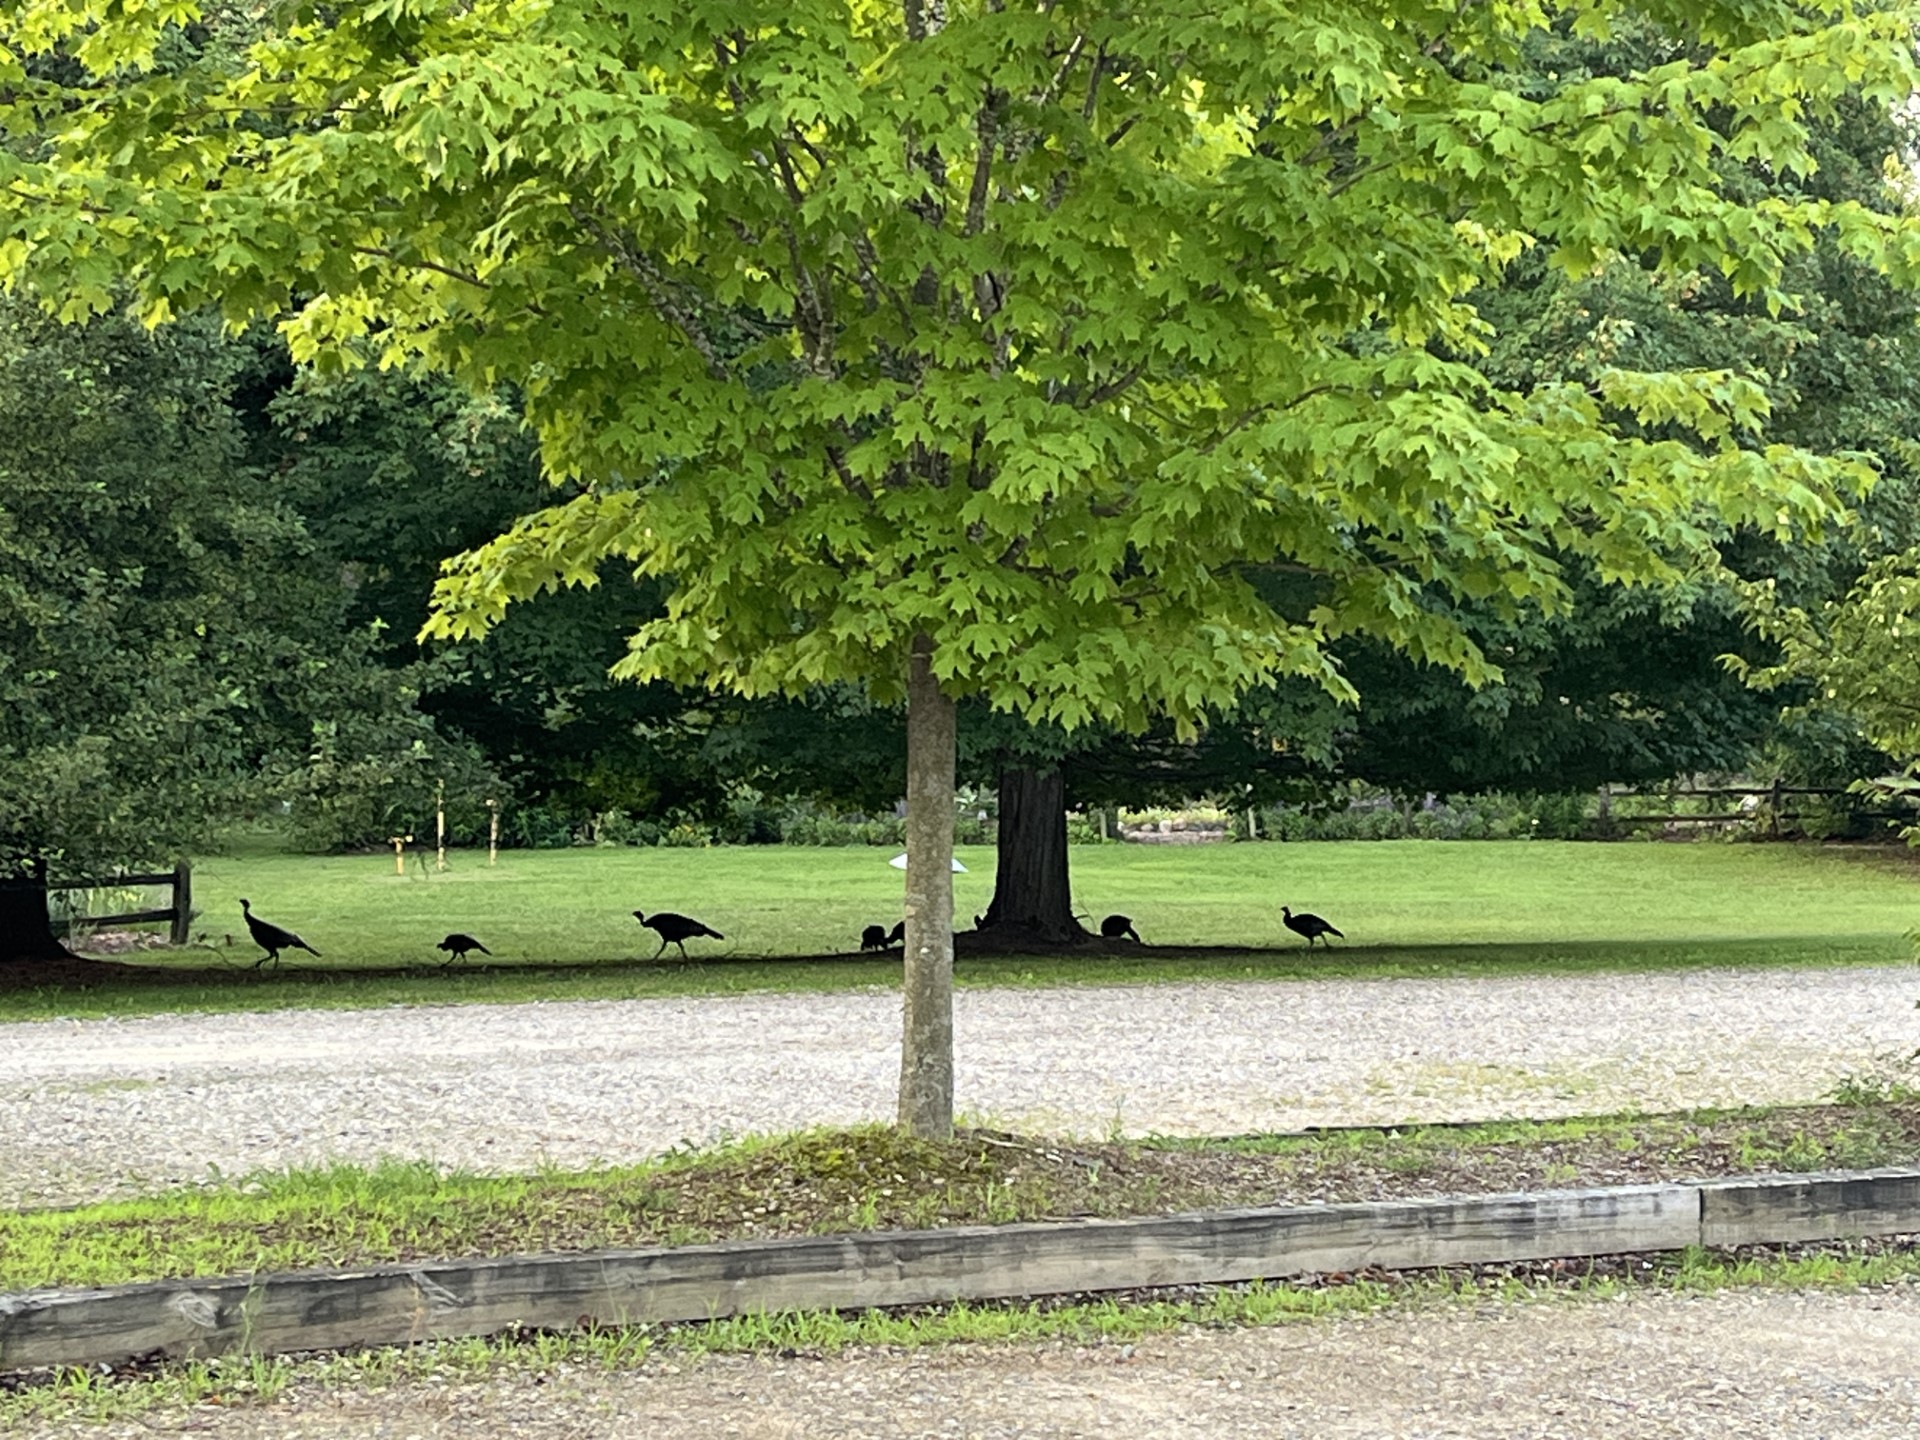 Young turkeys on the move